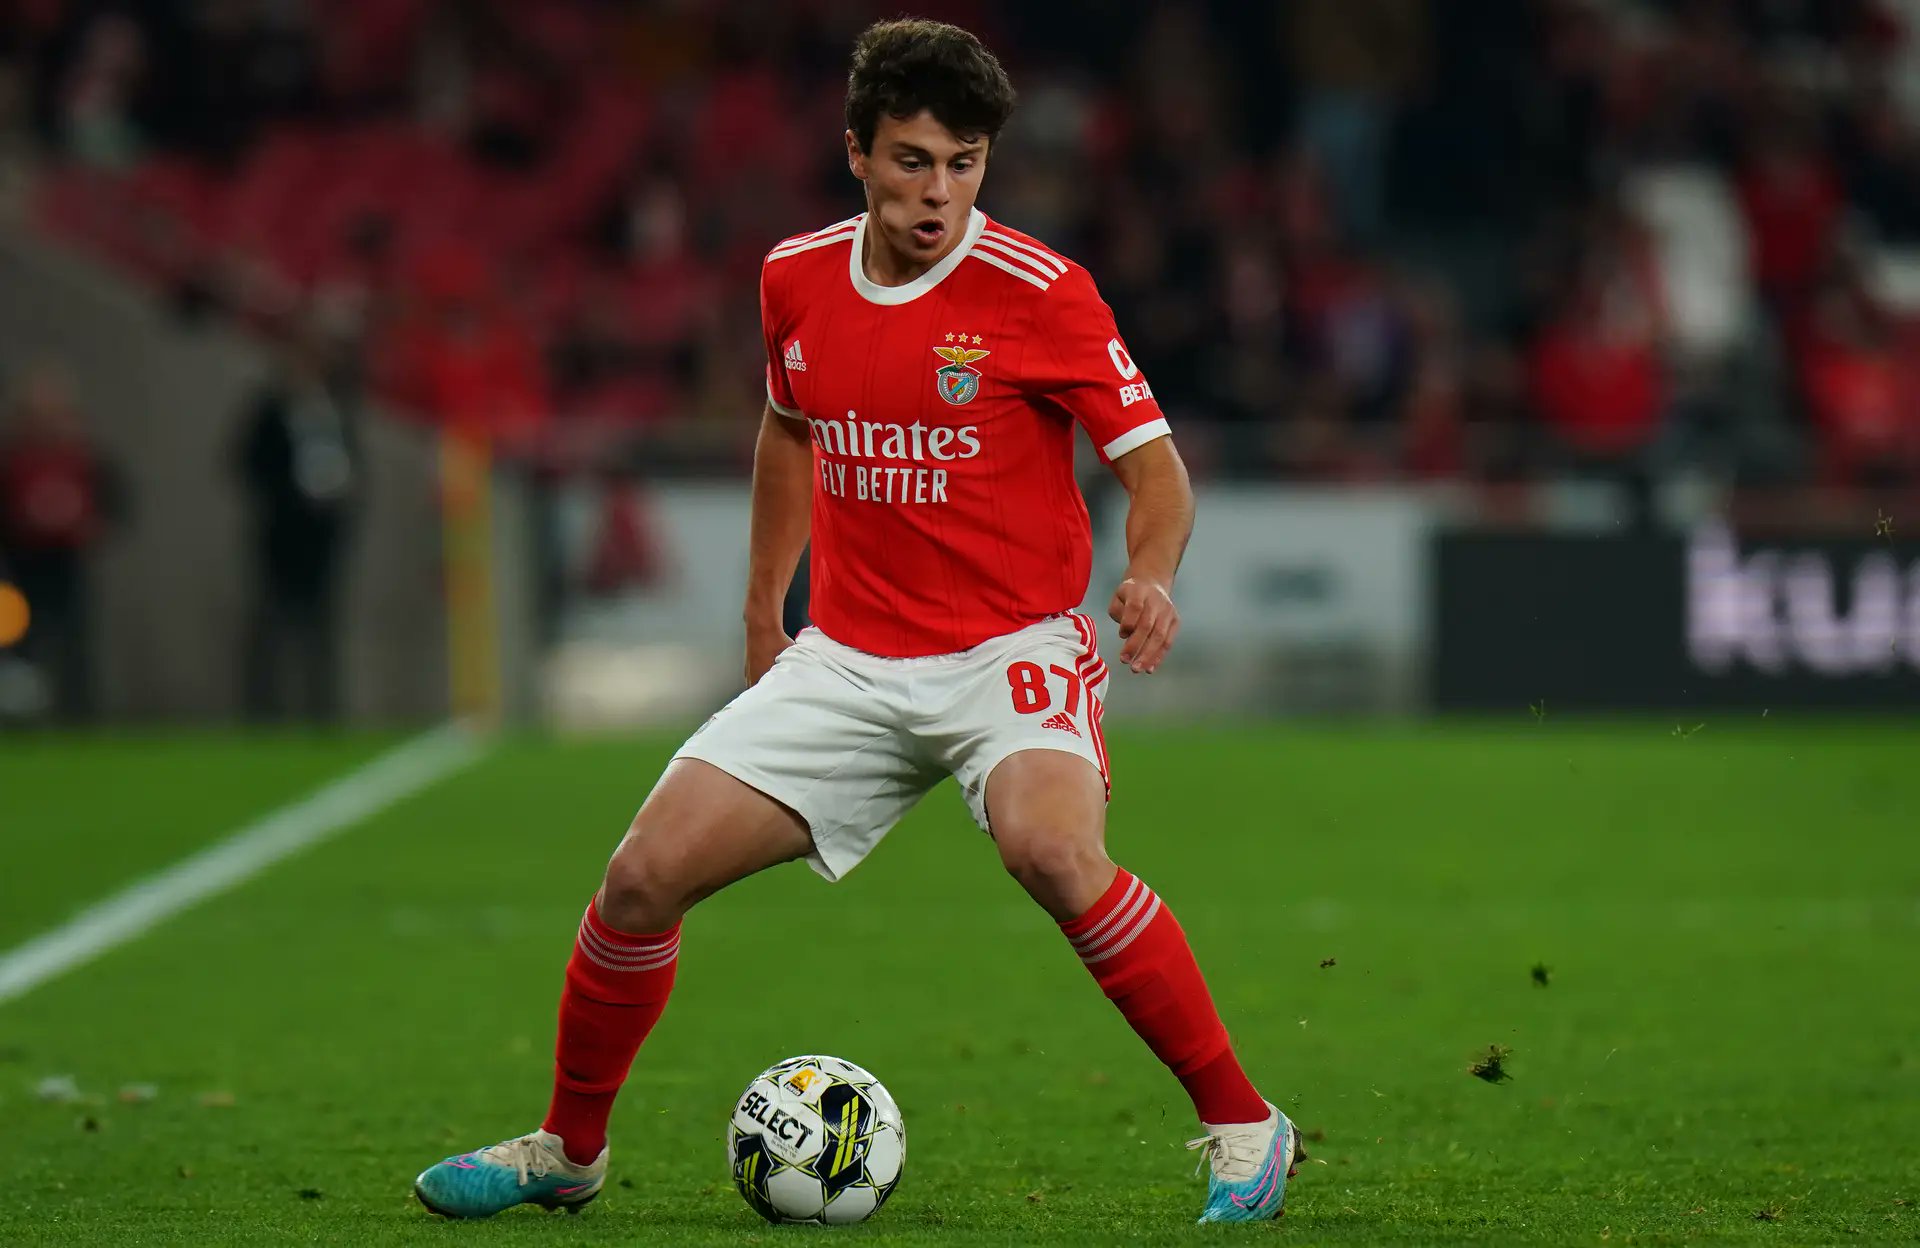 Bayern & Germany on X: "Benfica's talented midfielder João Neves (18) is  attracting interest from Bayern and Wolverhampton. Despite an ongoing  contract until 2028, Benfica will try to renew with Neves and